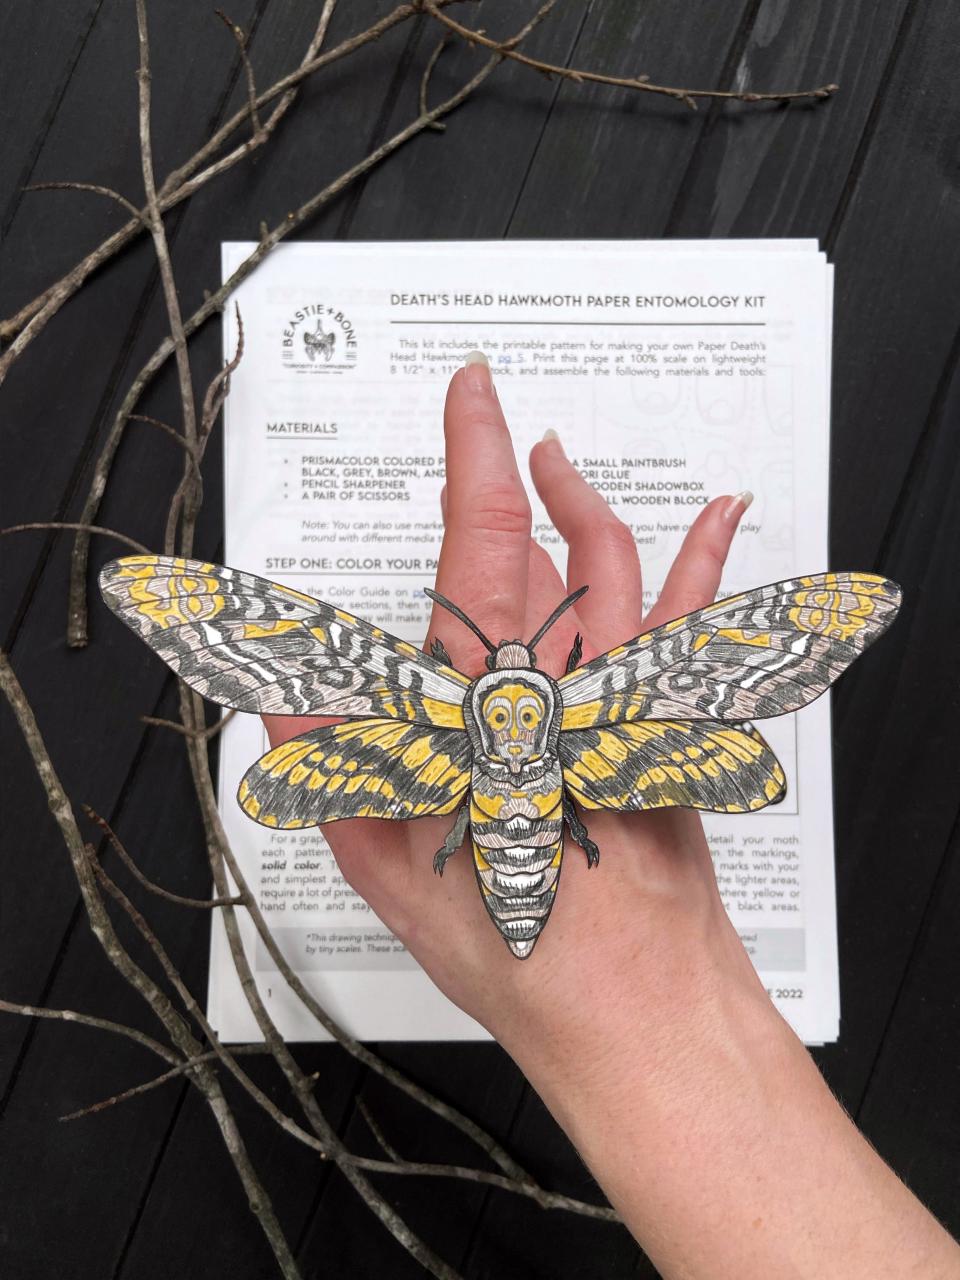 Beastie + Bone also offers a simplified paper taxidermy art kit for others wanting to create. Downloadable moth kits are available in the online shop, and the available options are the Luna moth, the Clymene moth, and the Death's Head Hawkmoth (pictured here).